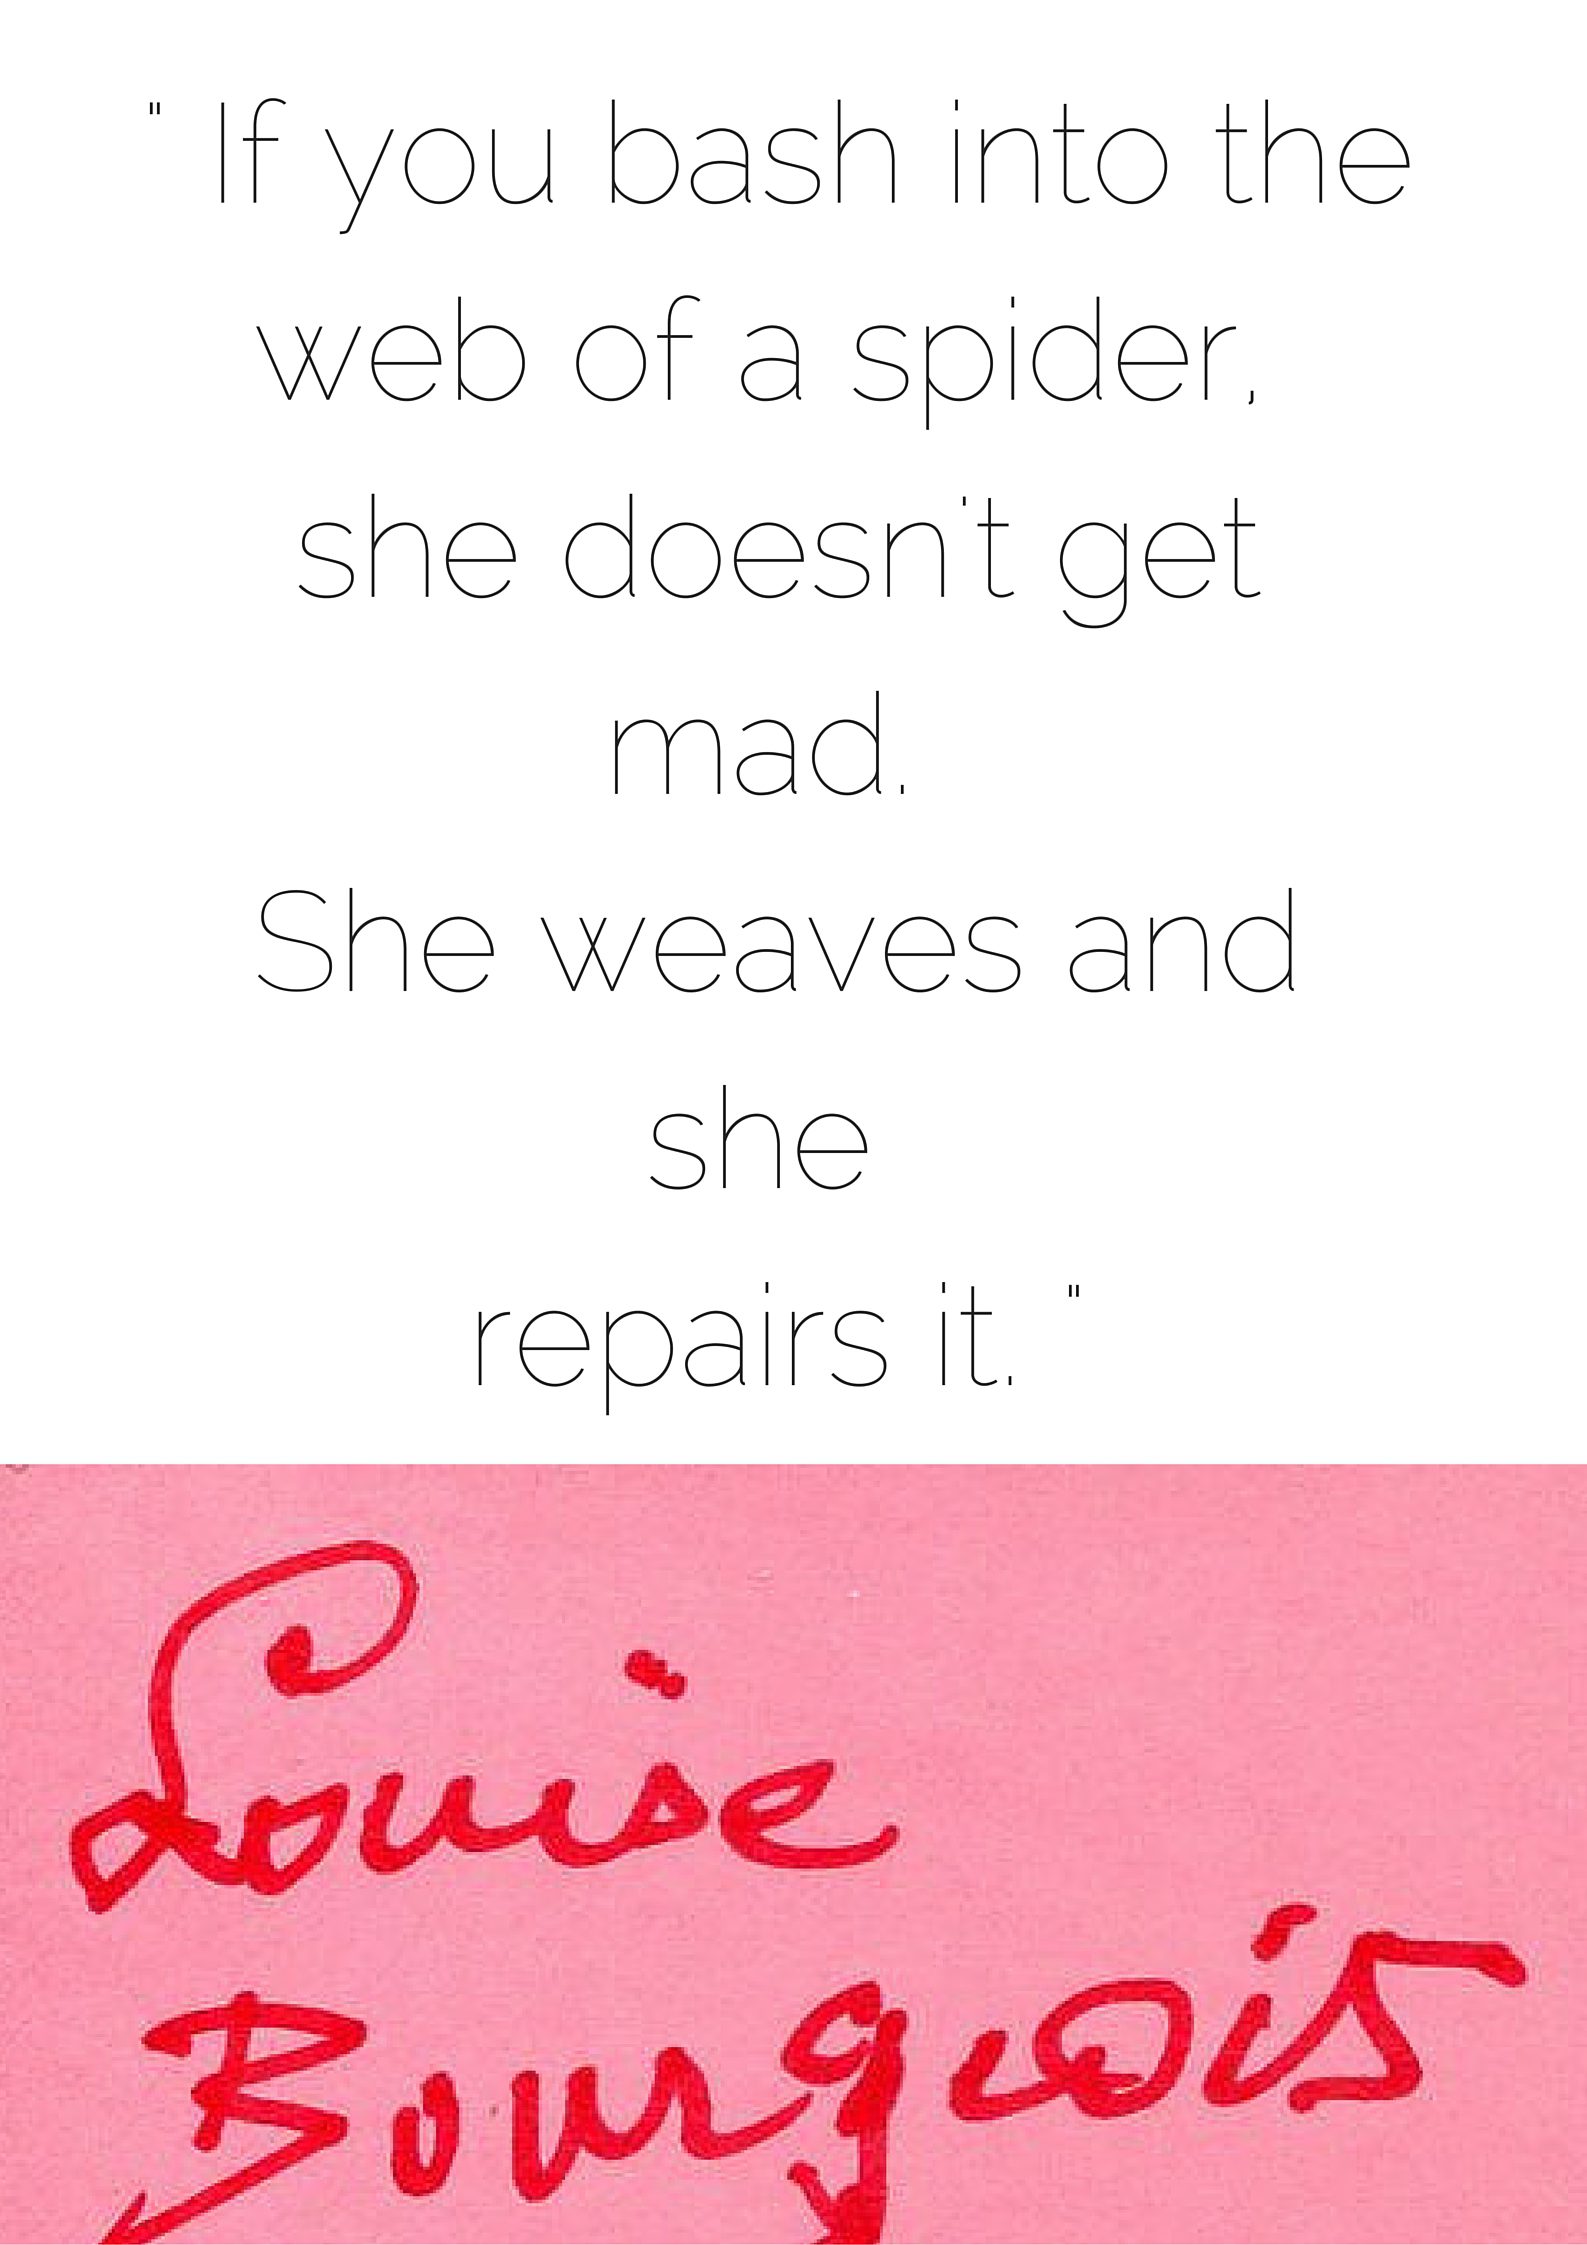 - If you bash into the web of a spider, she doesn't get mad. She weaves and she repairs it. -